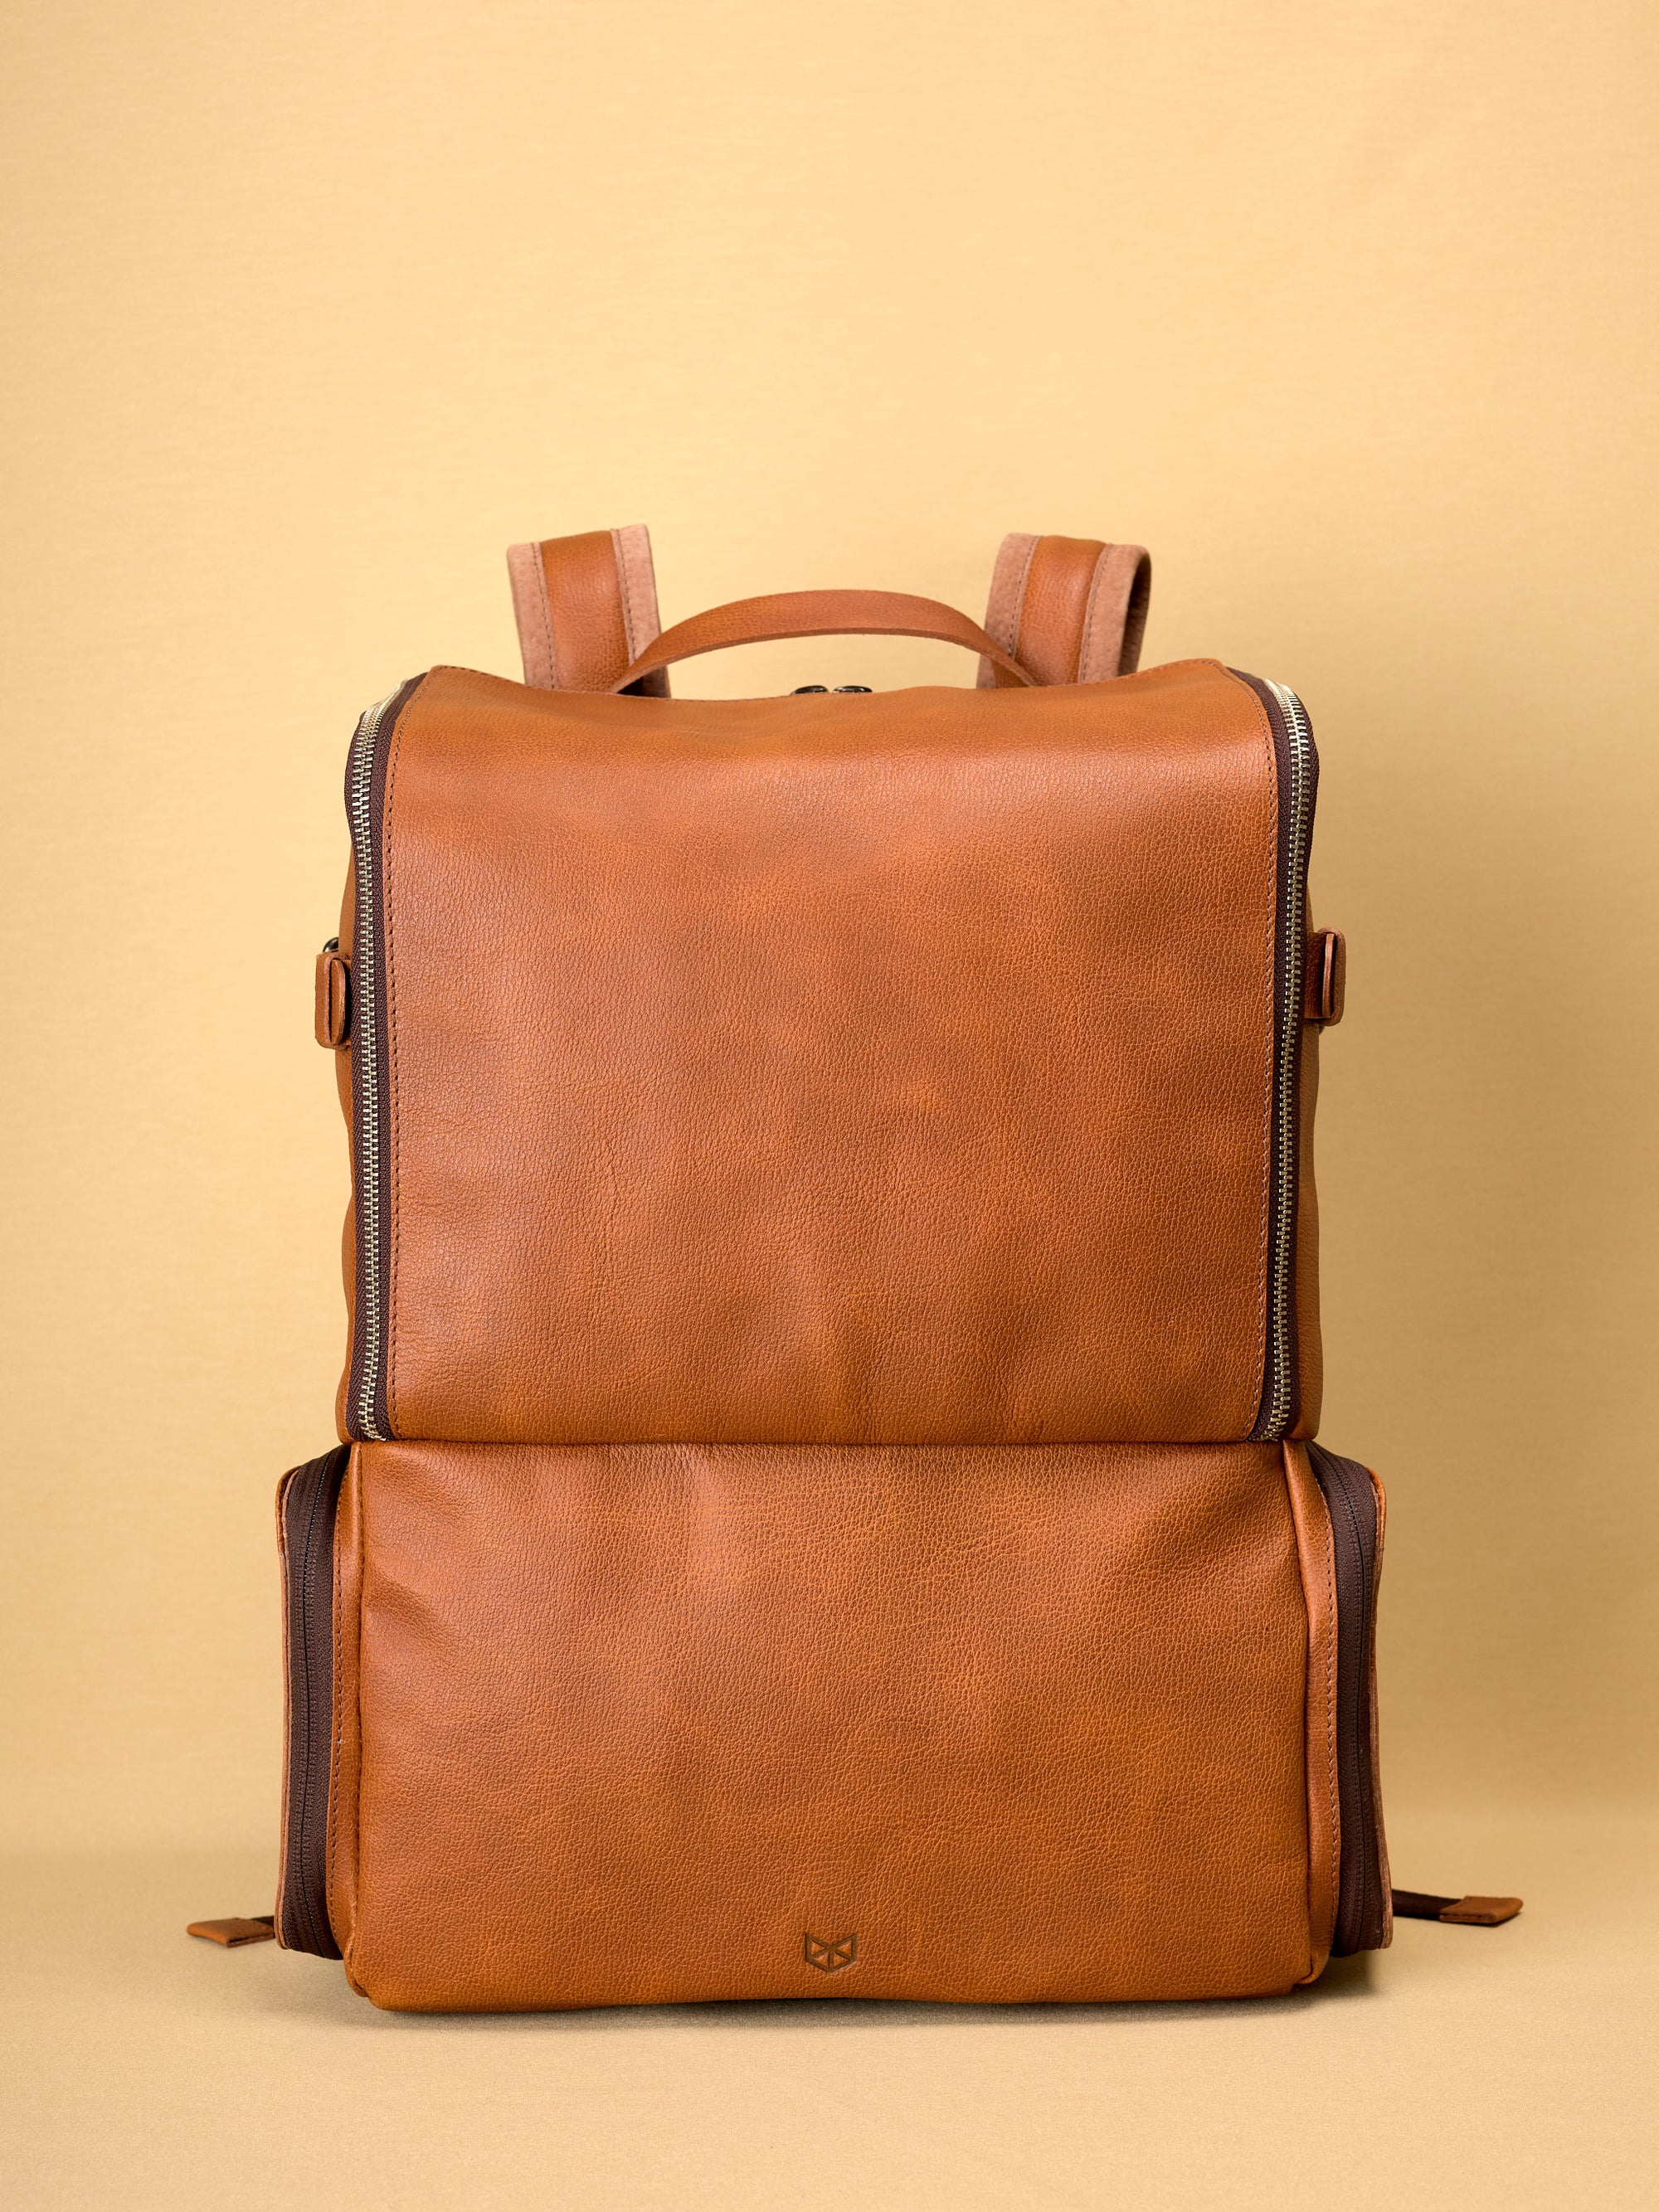 best camera bags tan by capra leather